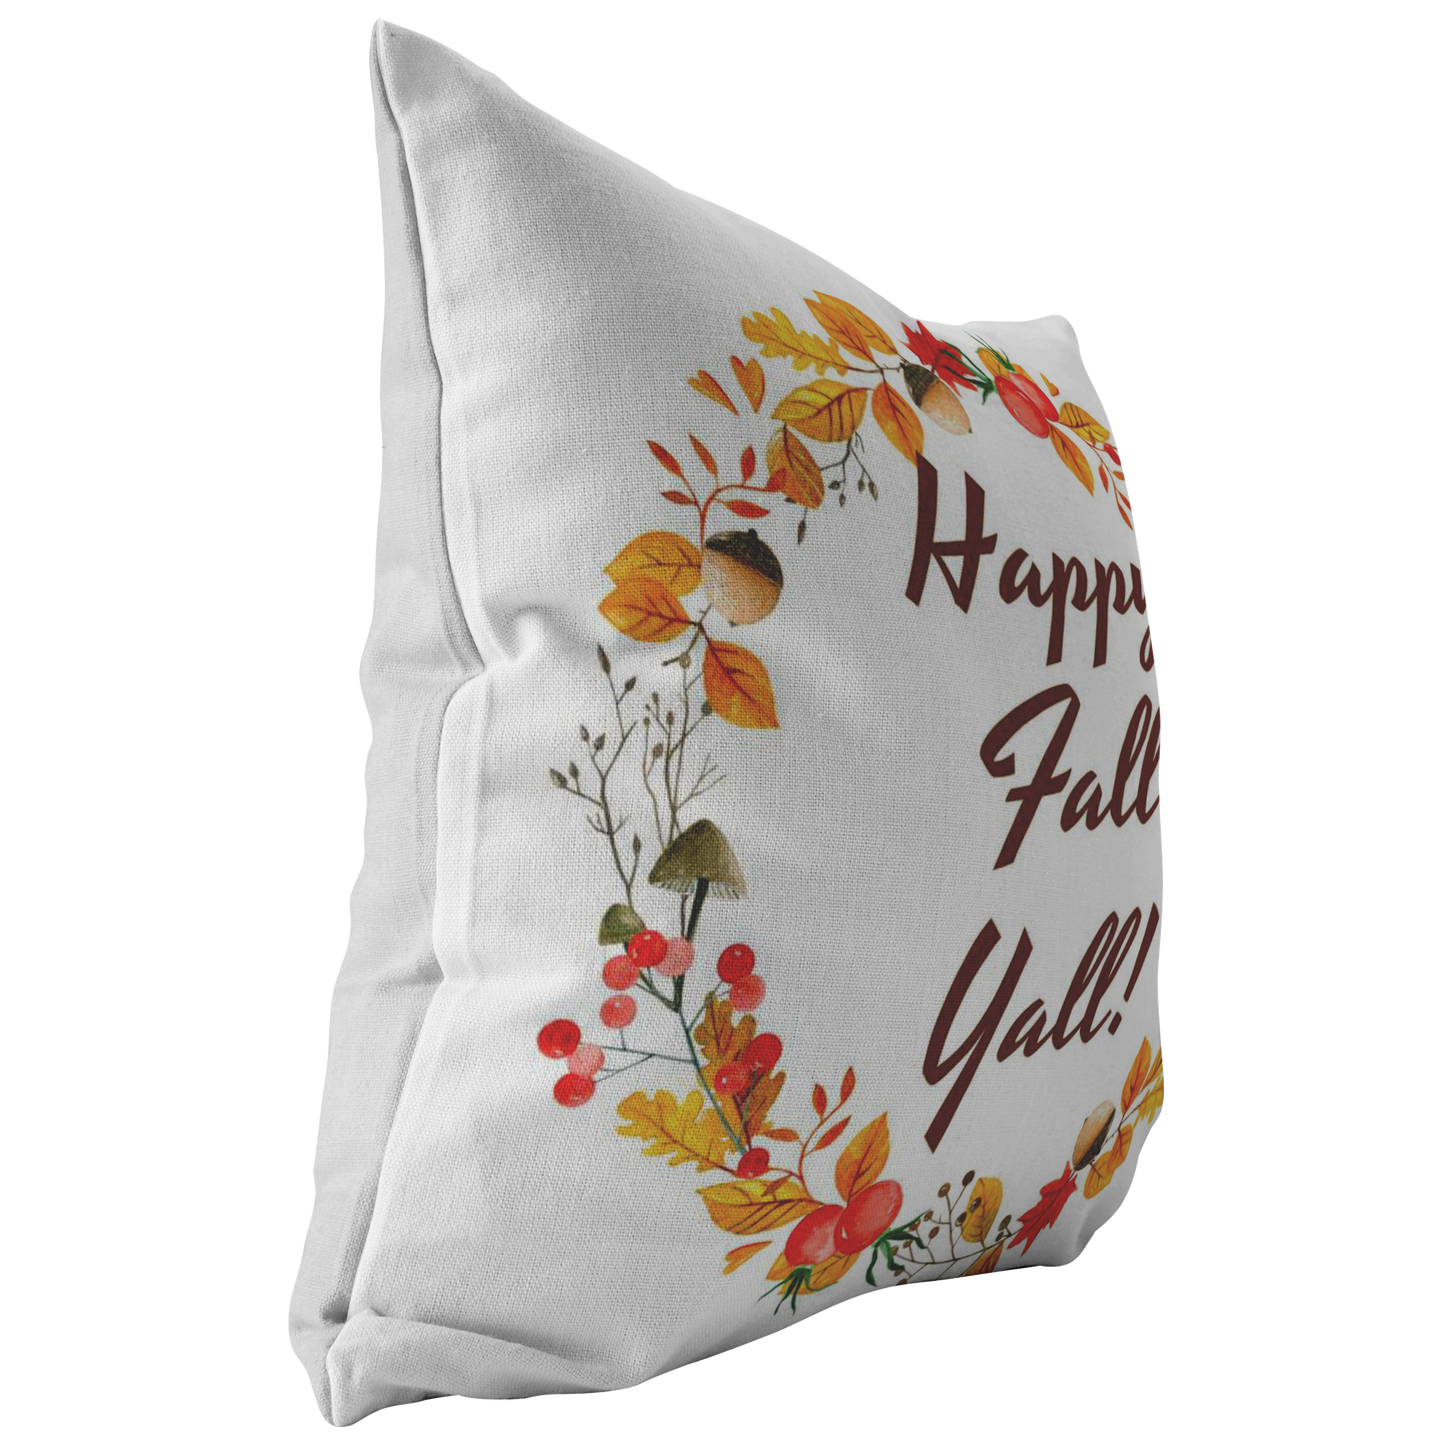 Fall Throw Pillow Cover Home Decor Couch Accent Decorative Pillow Happy Fall Yall!